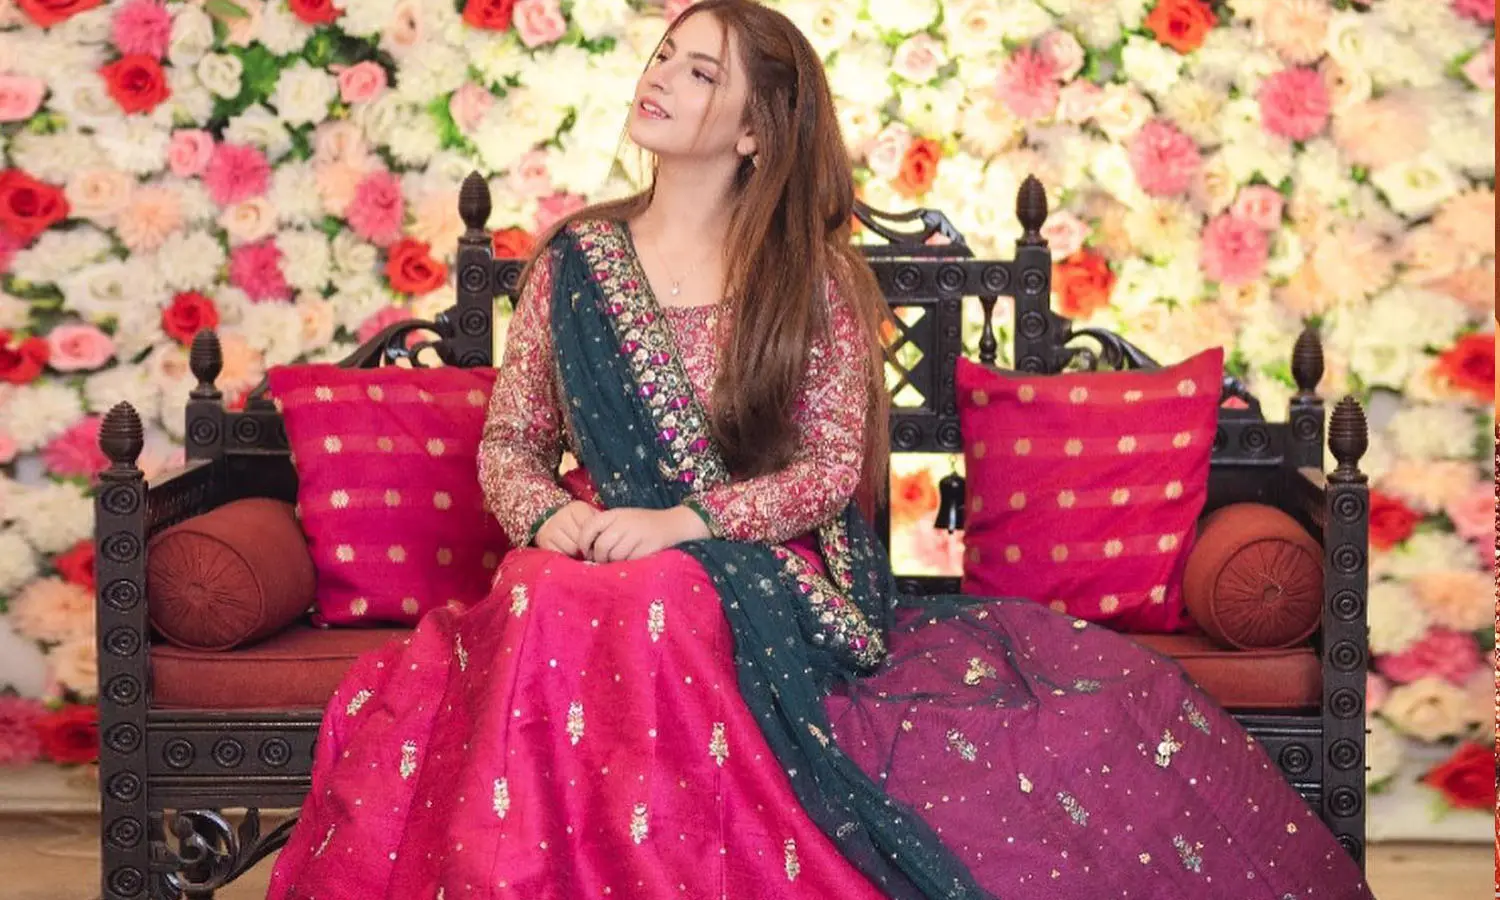 Dananeer Mobeen Wows Fans in a Gorgeous Pink Lehenga